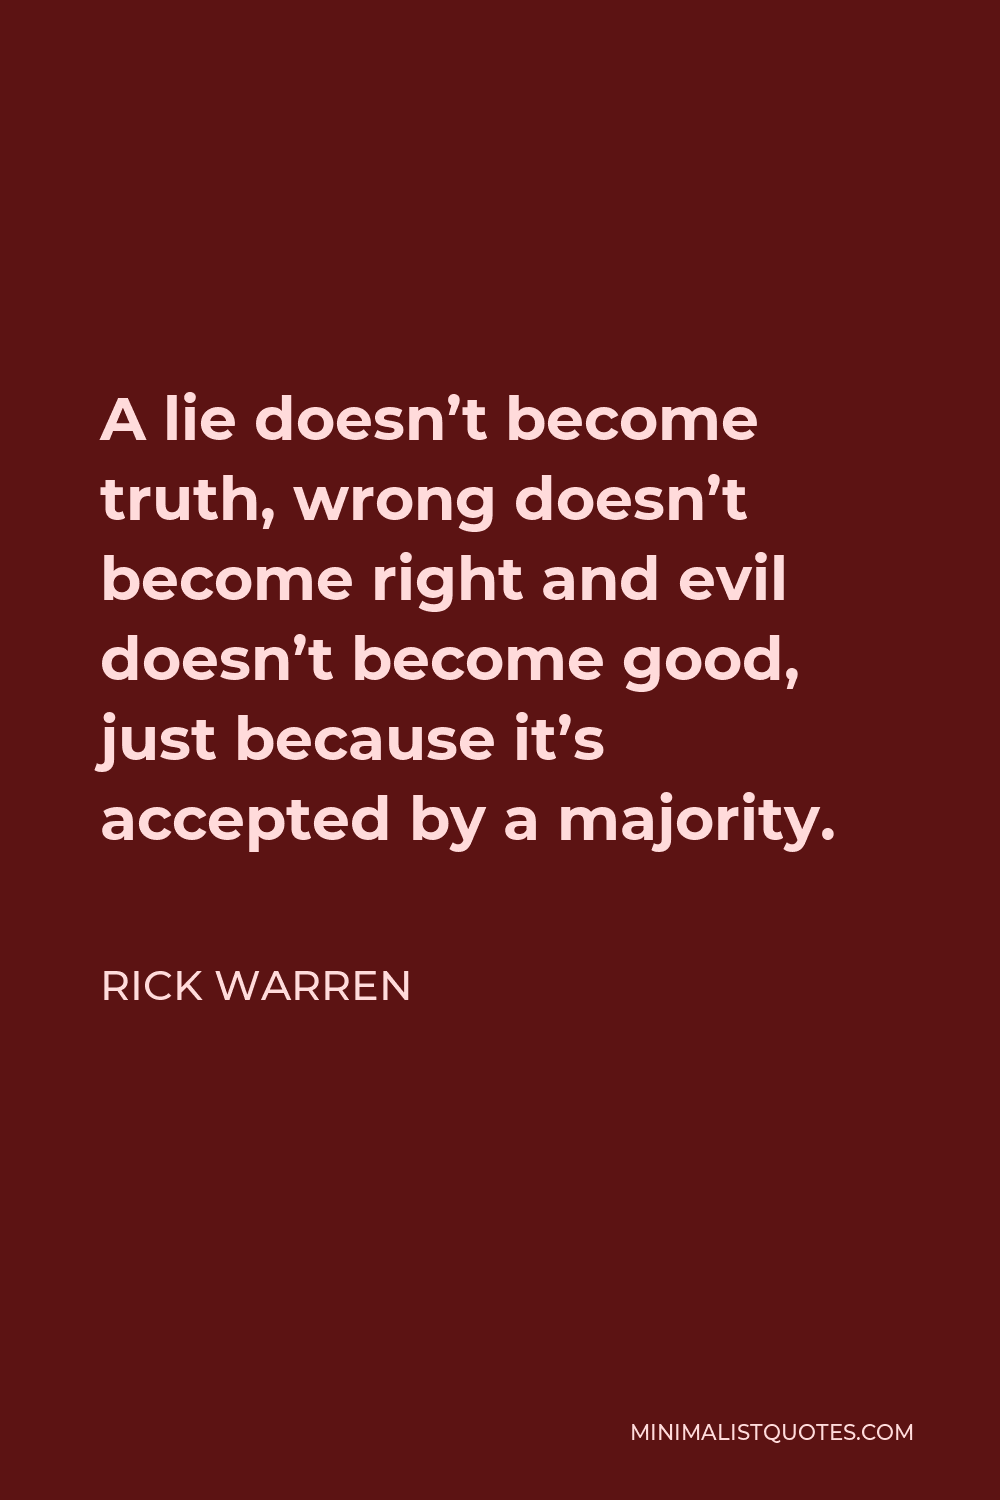 Rick Warren Quote - A lie doesn’t become truth, wrong doesn’t become right and evil doesn’t become good, just because it’s accepted by a majority.